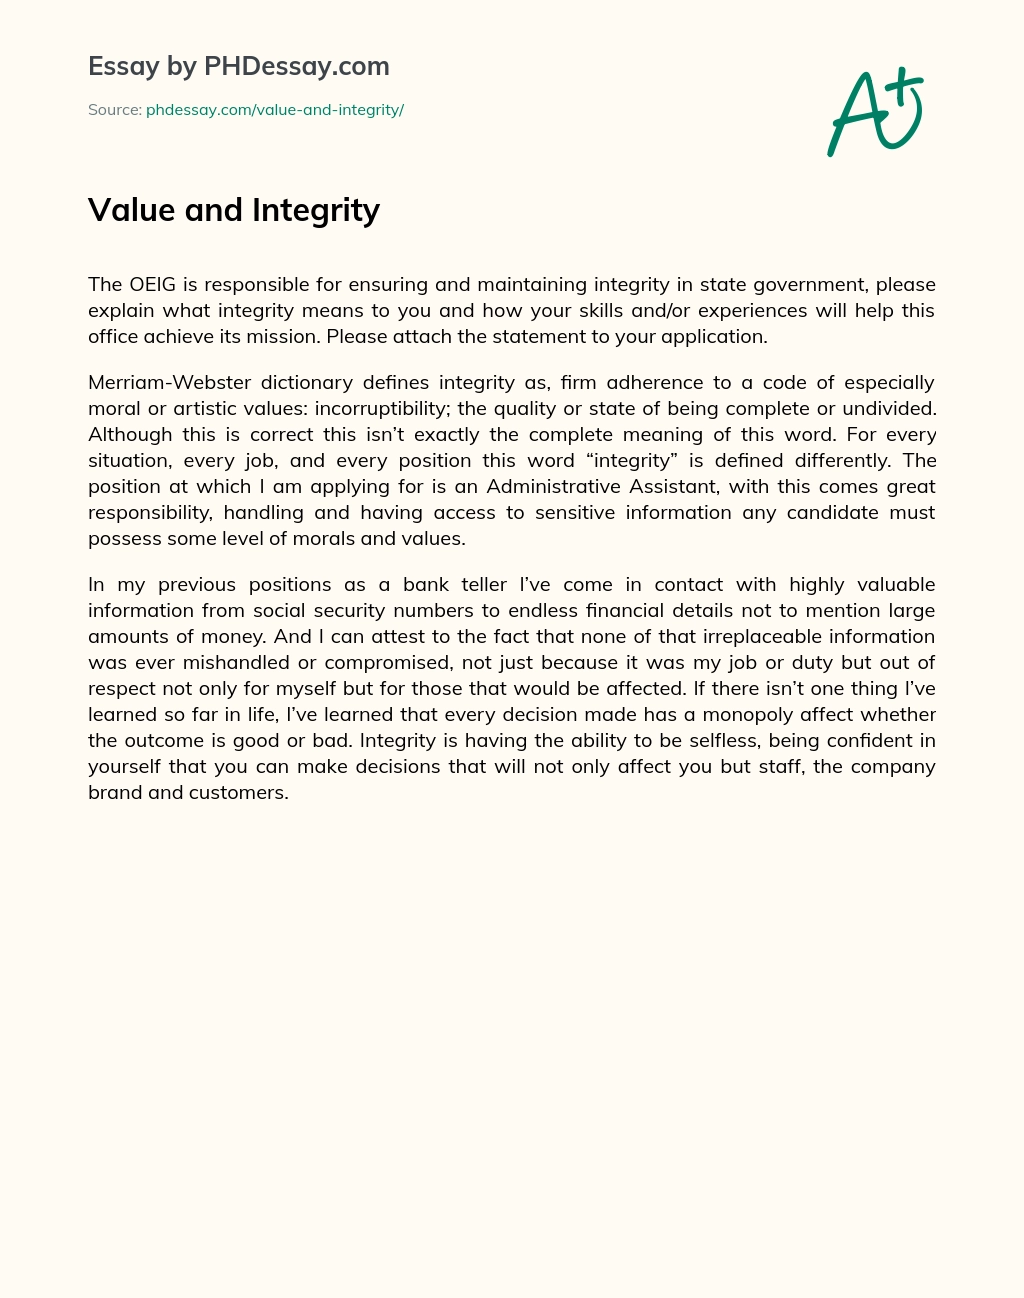 Value and Integrity essay